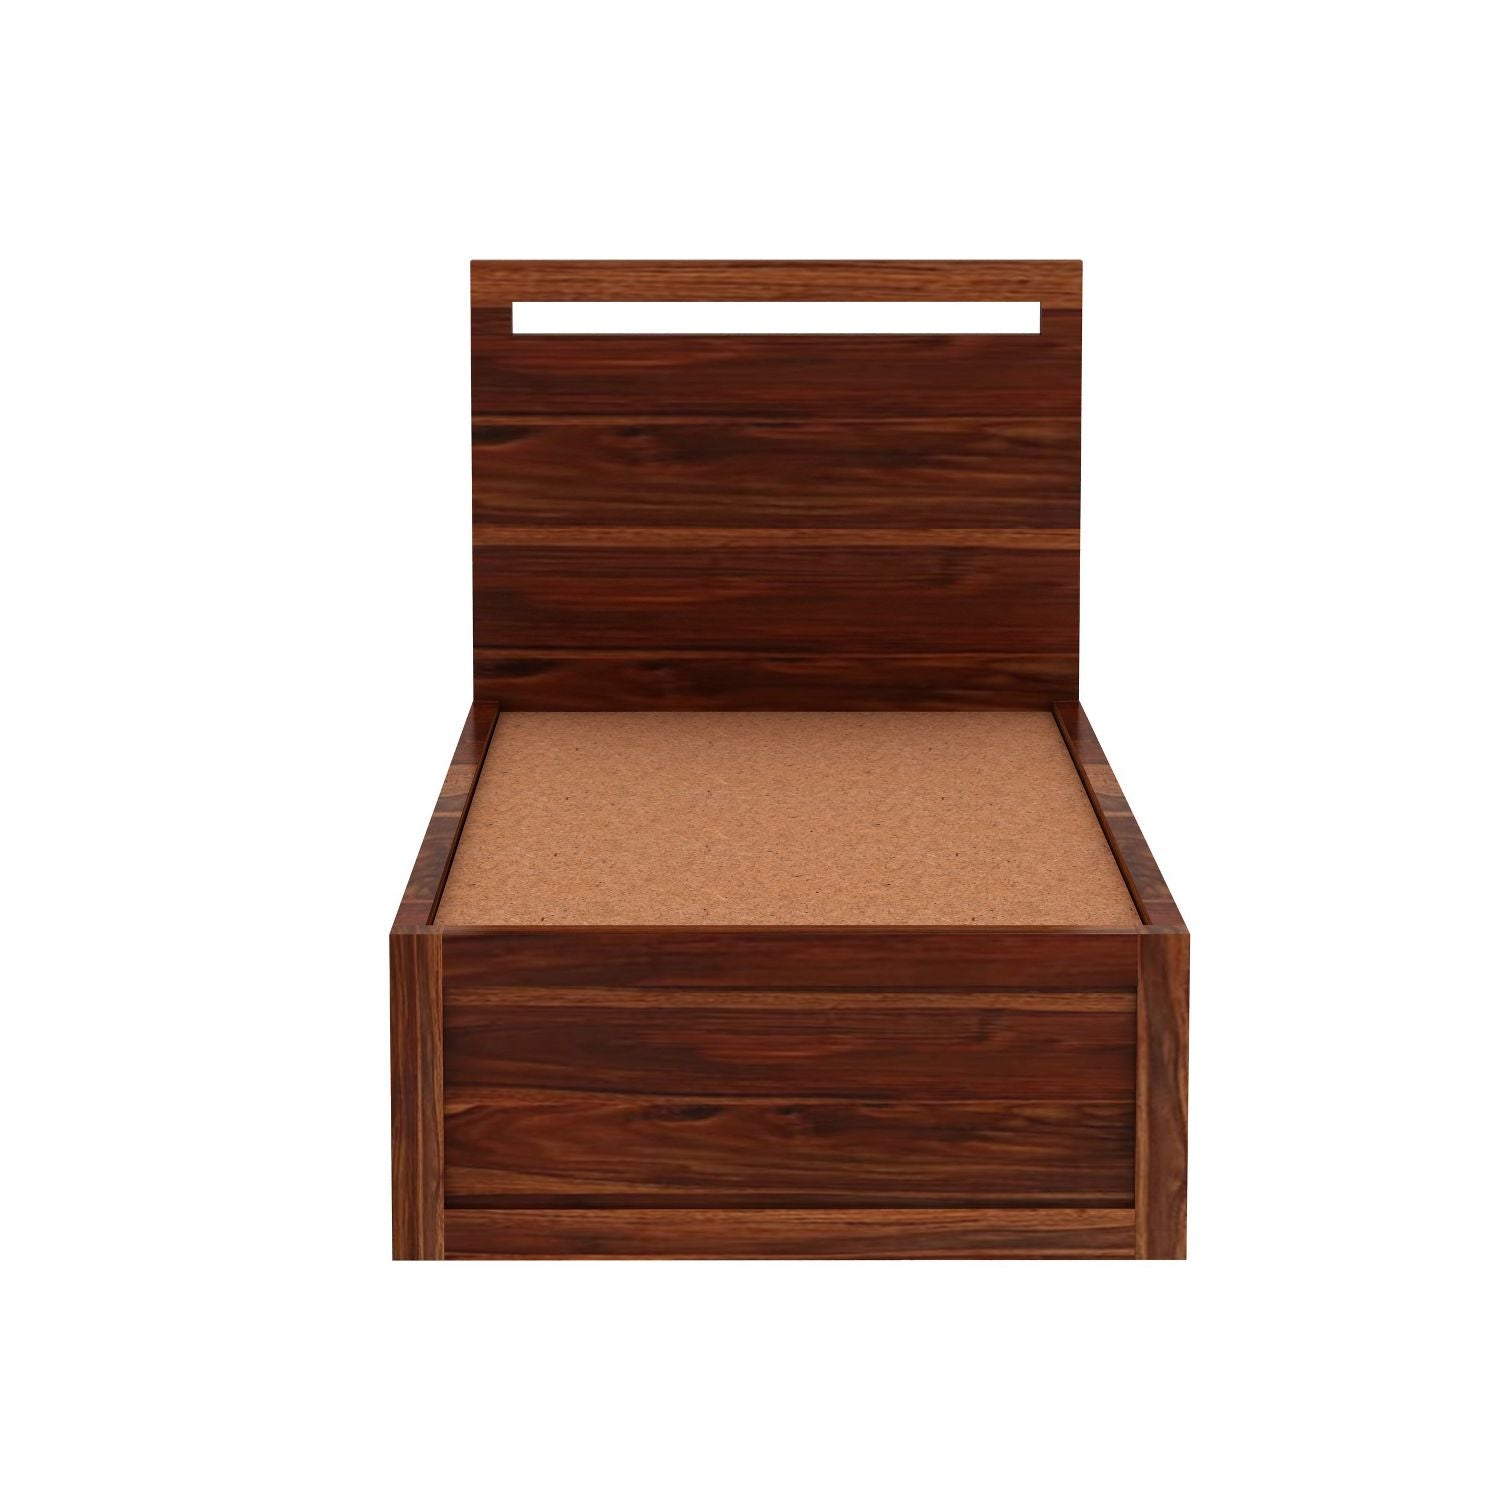 Livinn Solid Sheesham Wood Single Bed With Two Drawers (Natural Finish)